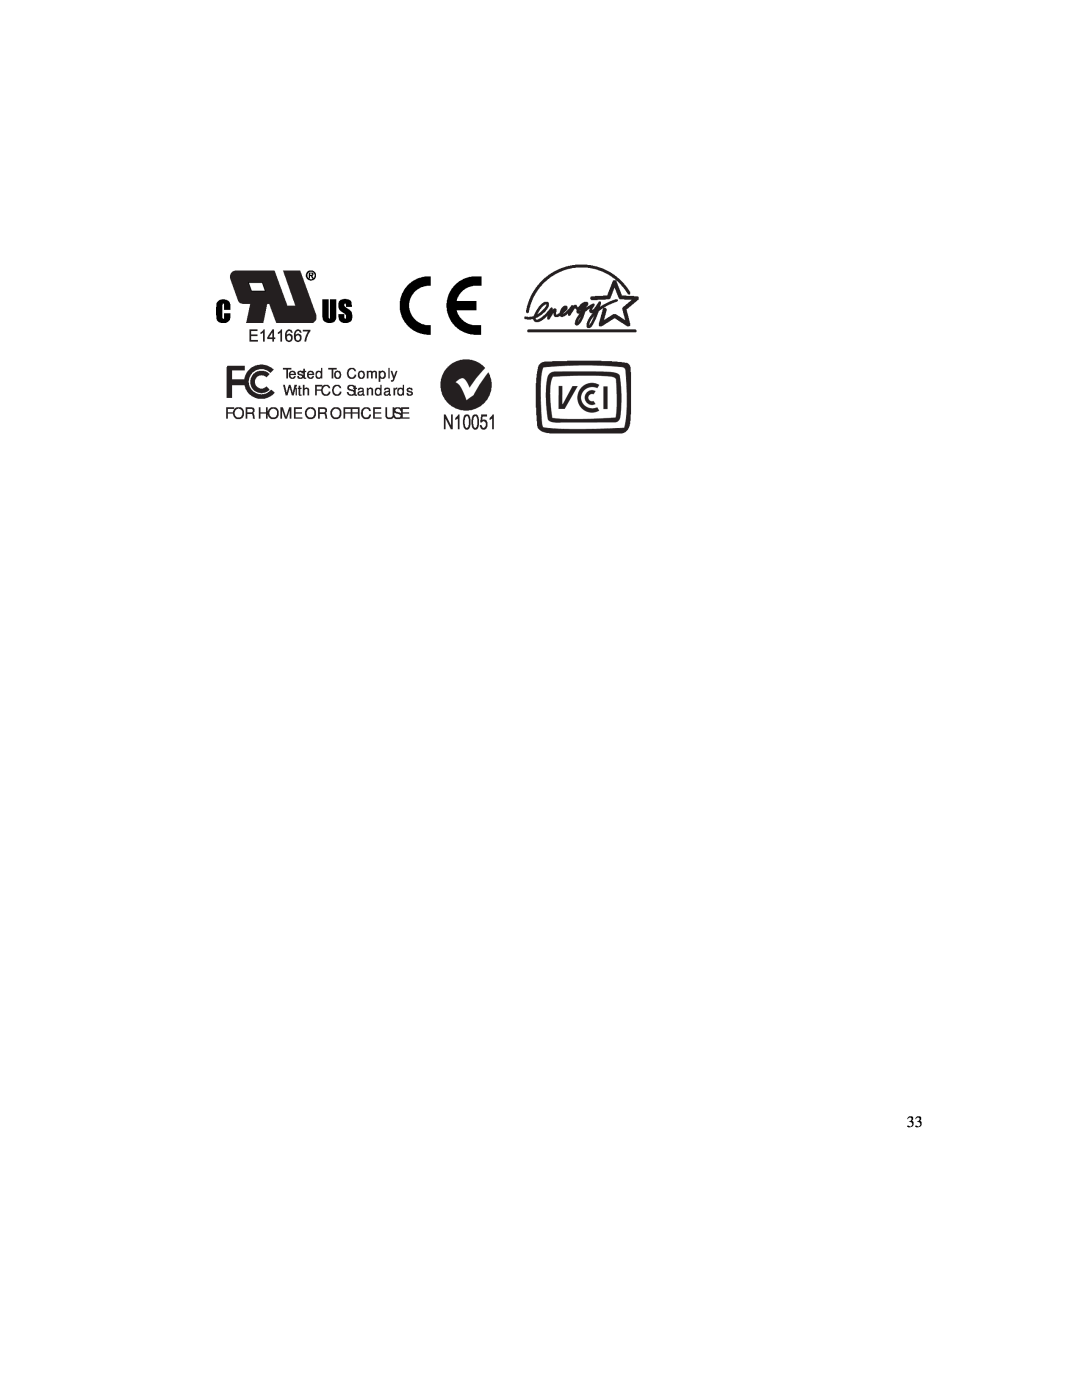 Elo TouchSystems 1247L manual E141667, For Home Or Office Use, Tested To Comply With FCC Standards, N10051 